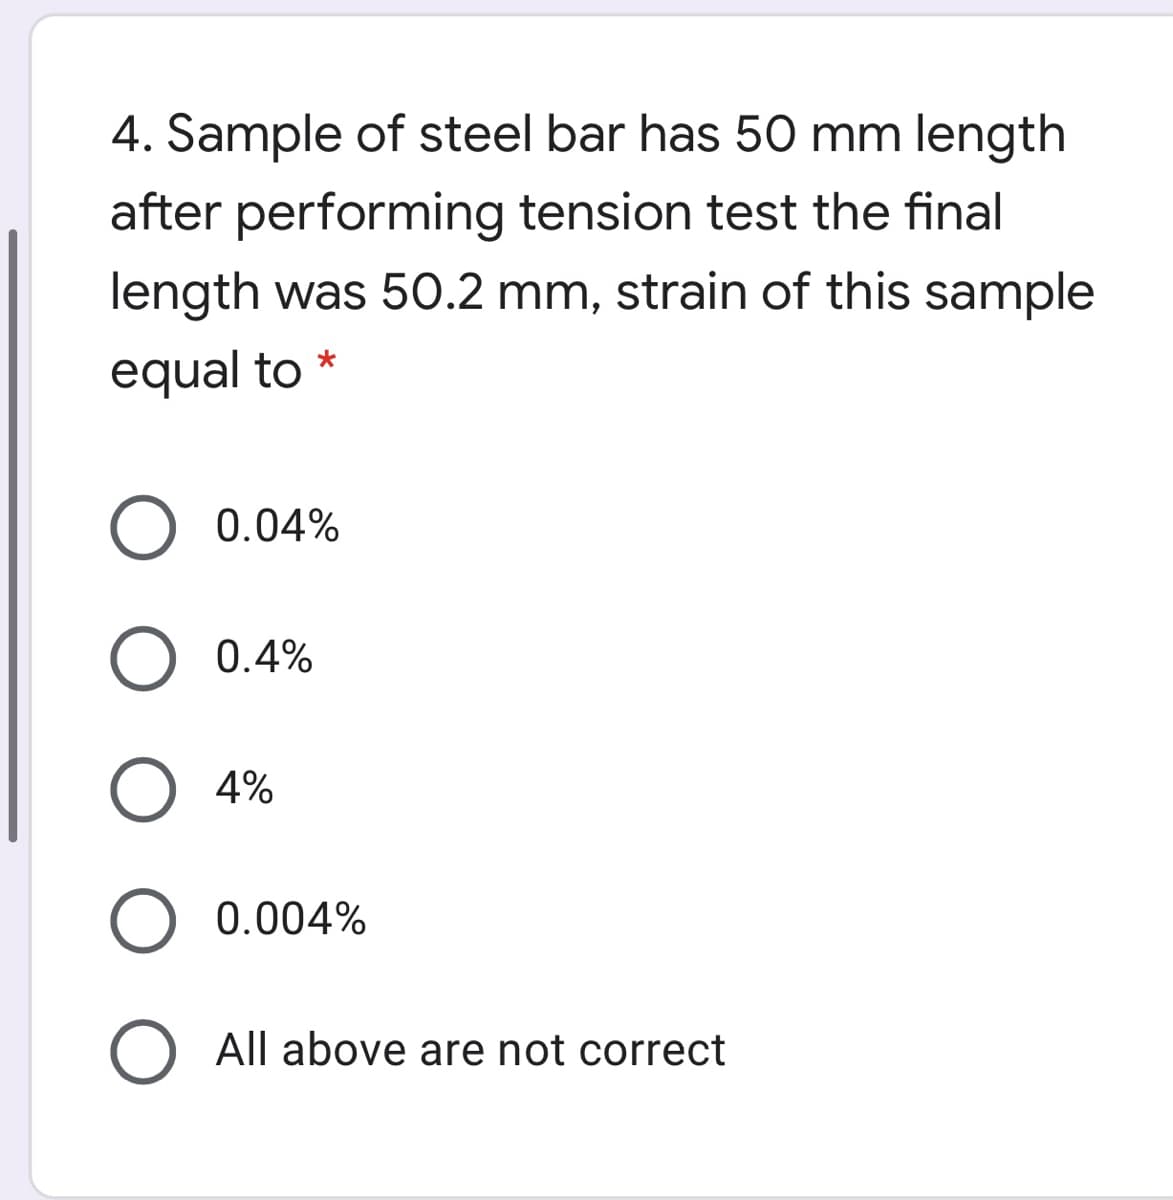 4. Sample of steel bar has 50 mm length
after performing tension test the final
length was 50.2 mm, strain of this sample
equal to *
0.04%
0.4%
4%
0.004%
O All above are not correct
